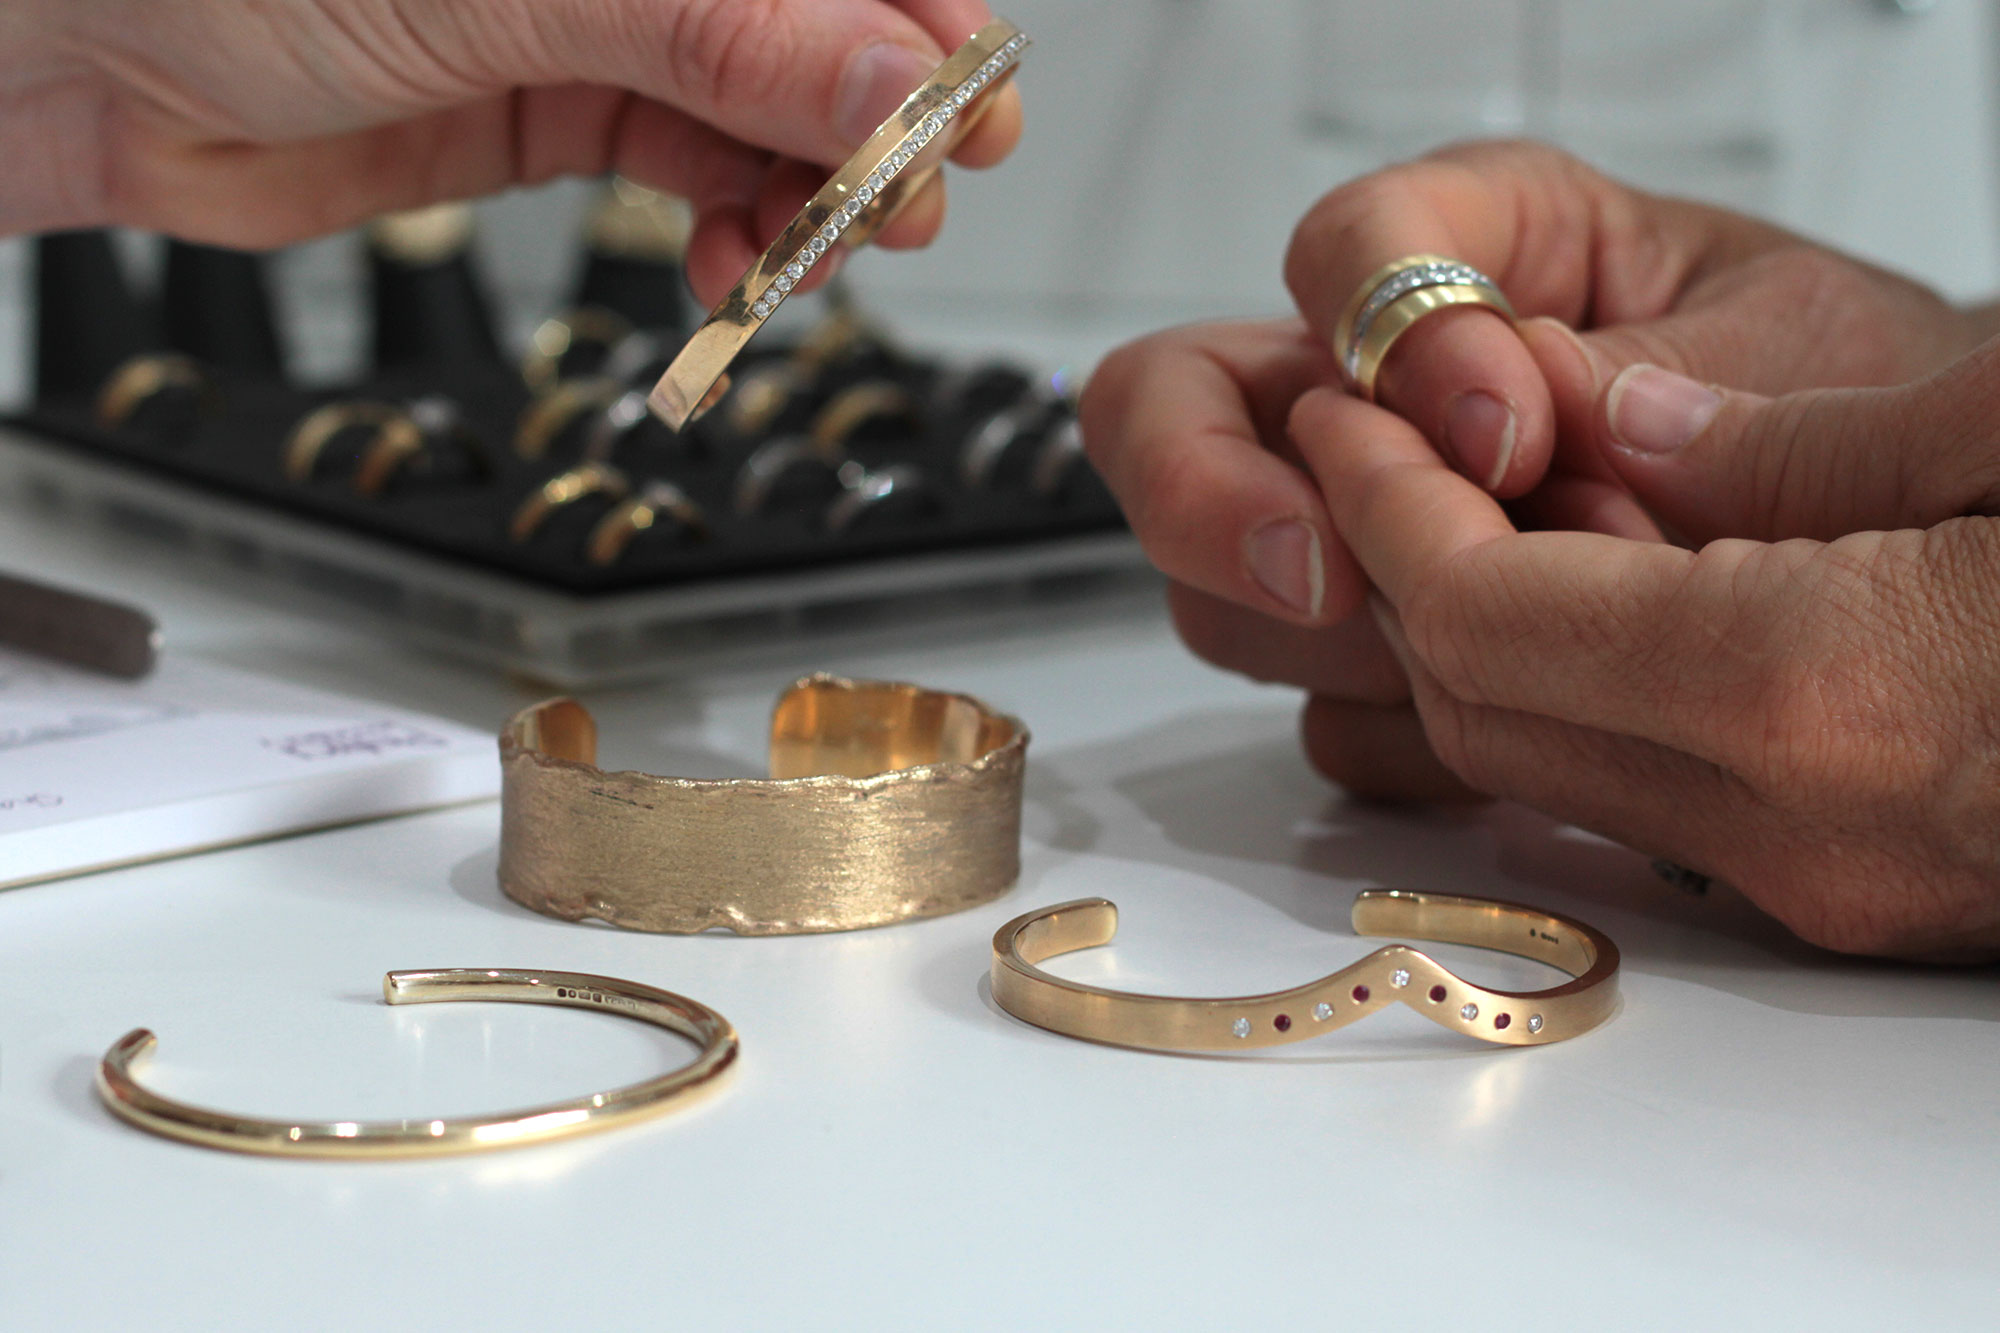 re-modeling jewellery, engagement rings, wedding bands